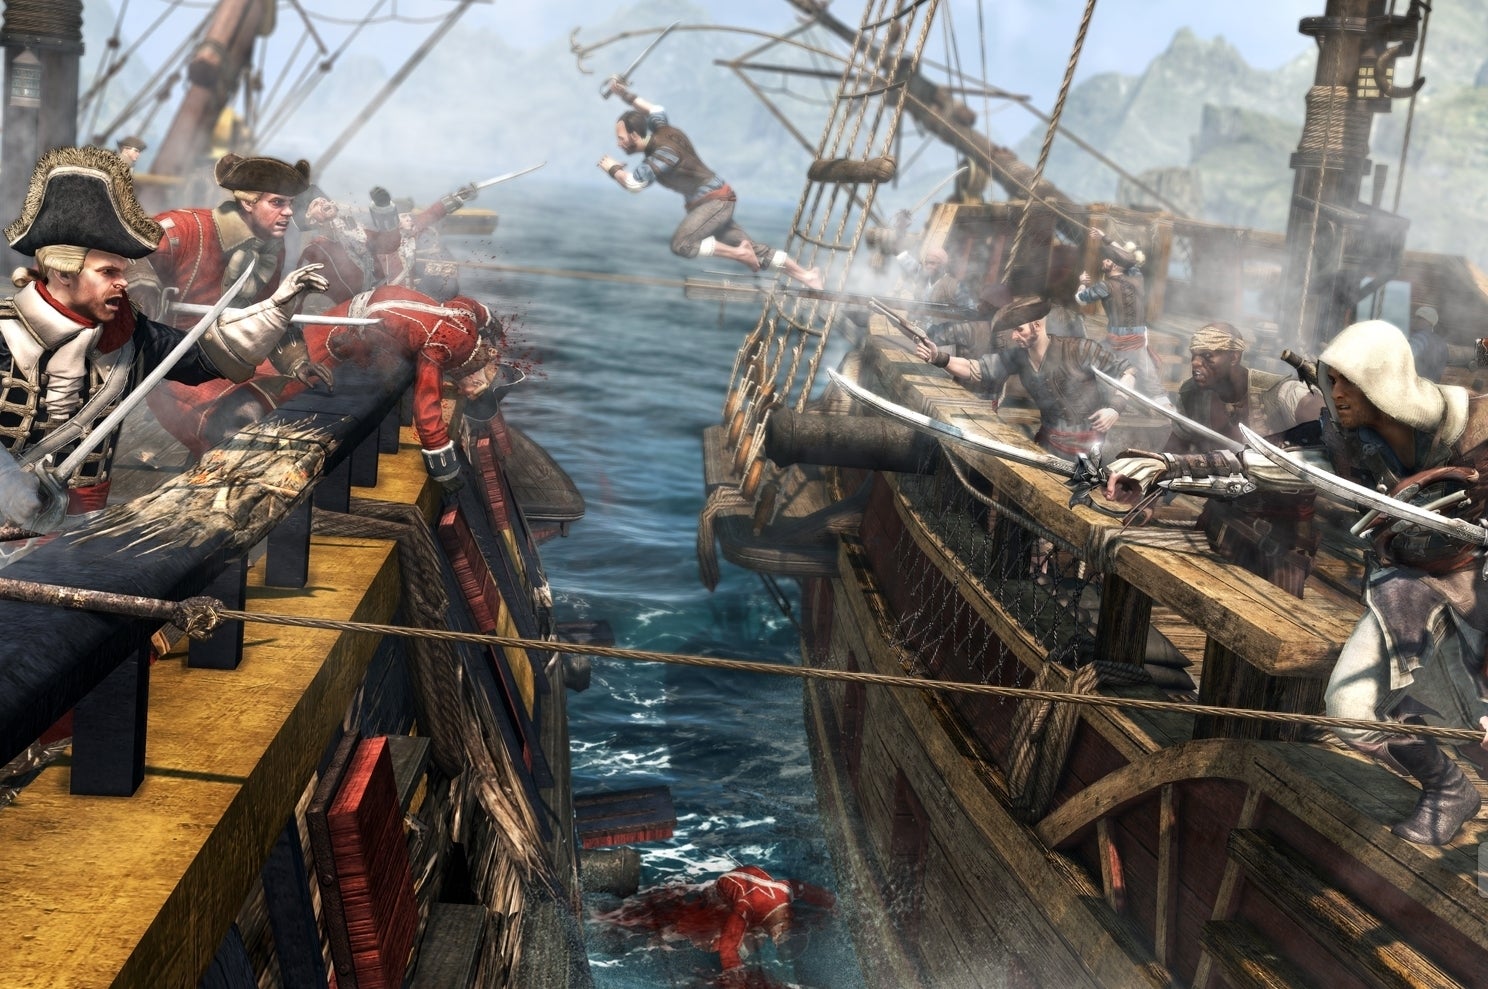 Image for Ubisoft polls interest in a non-Assassin's Creed pirate game